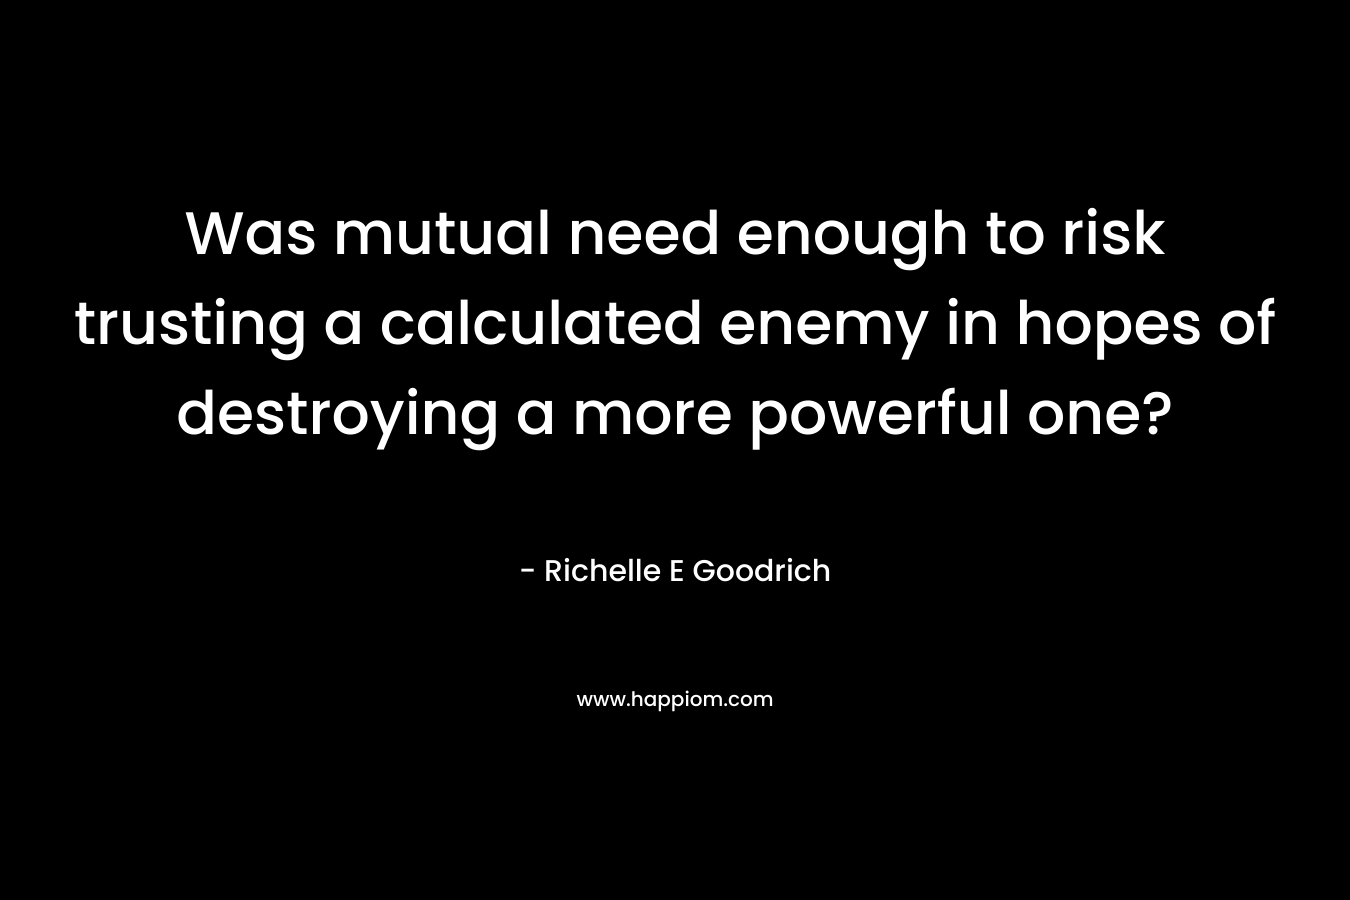 Was mutual need enough to risk trusting a calculated enemy in hopes of destroying a more powerful one? – Richelle E Goodrich